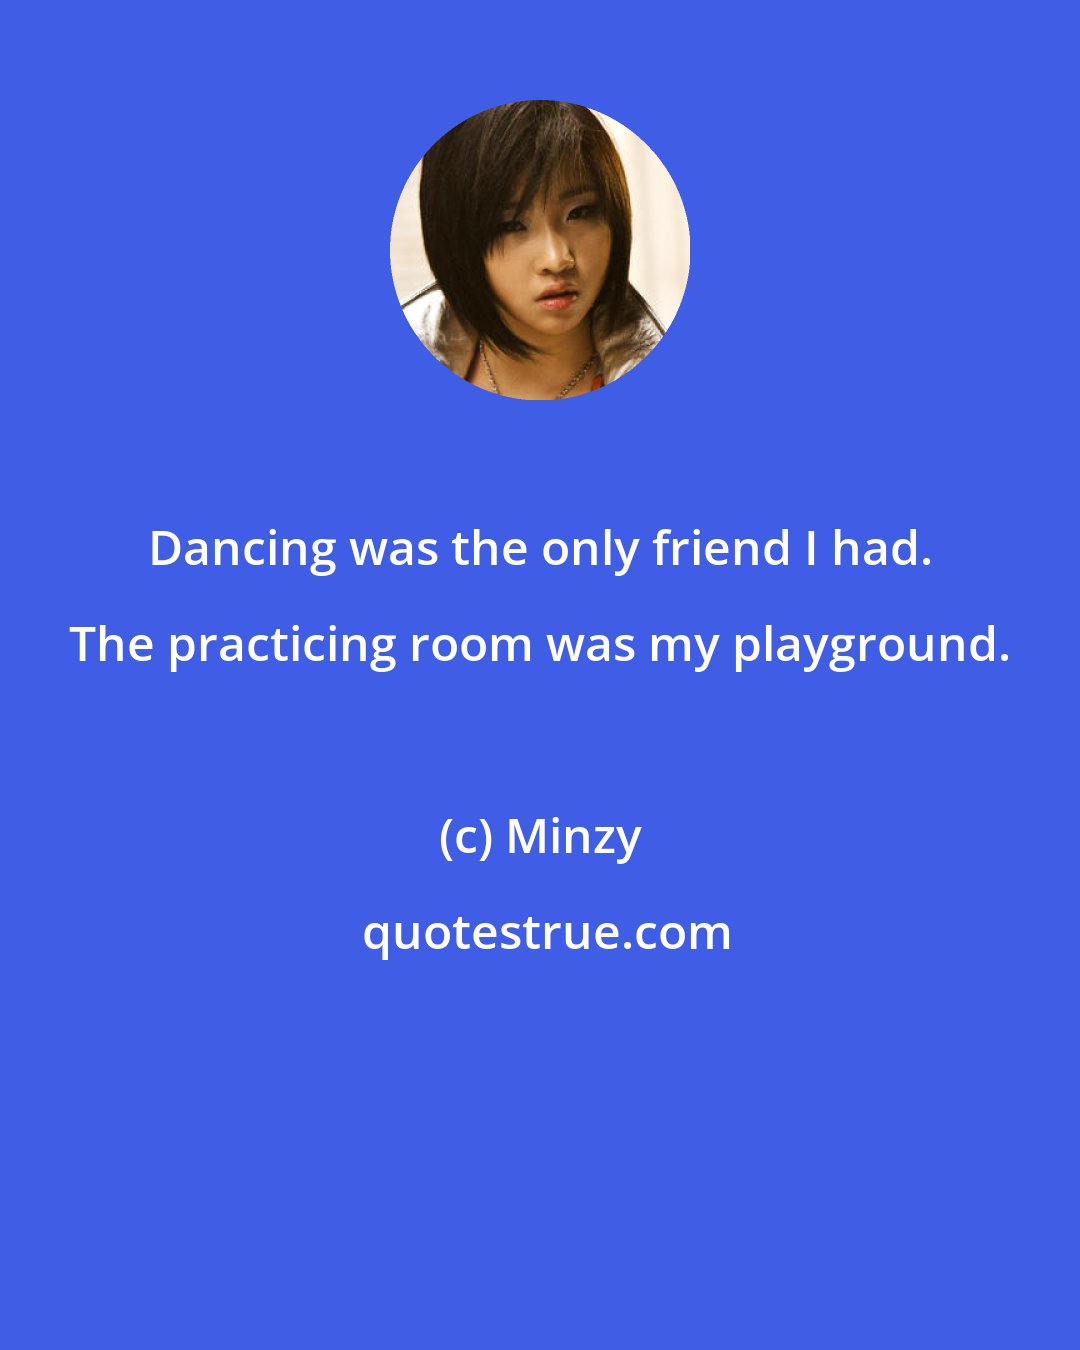 Minzy: Dancing was the only friend I had. The practicing room was my playground.